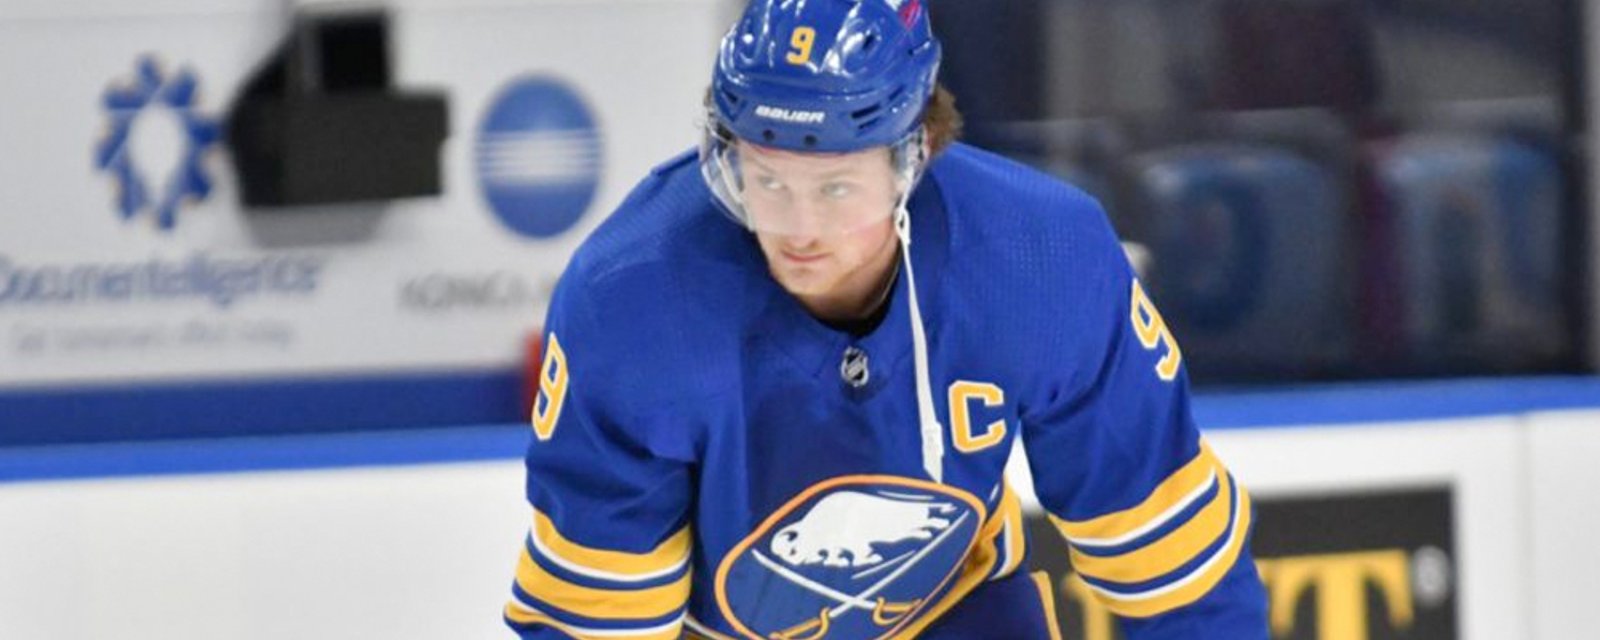 Huge update in Eichel trade saga after he fires his agent